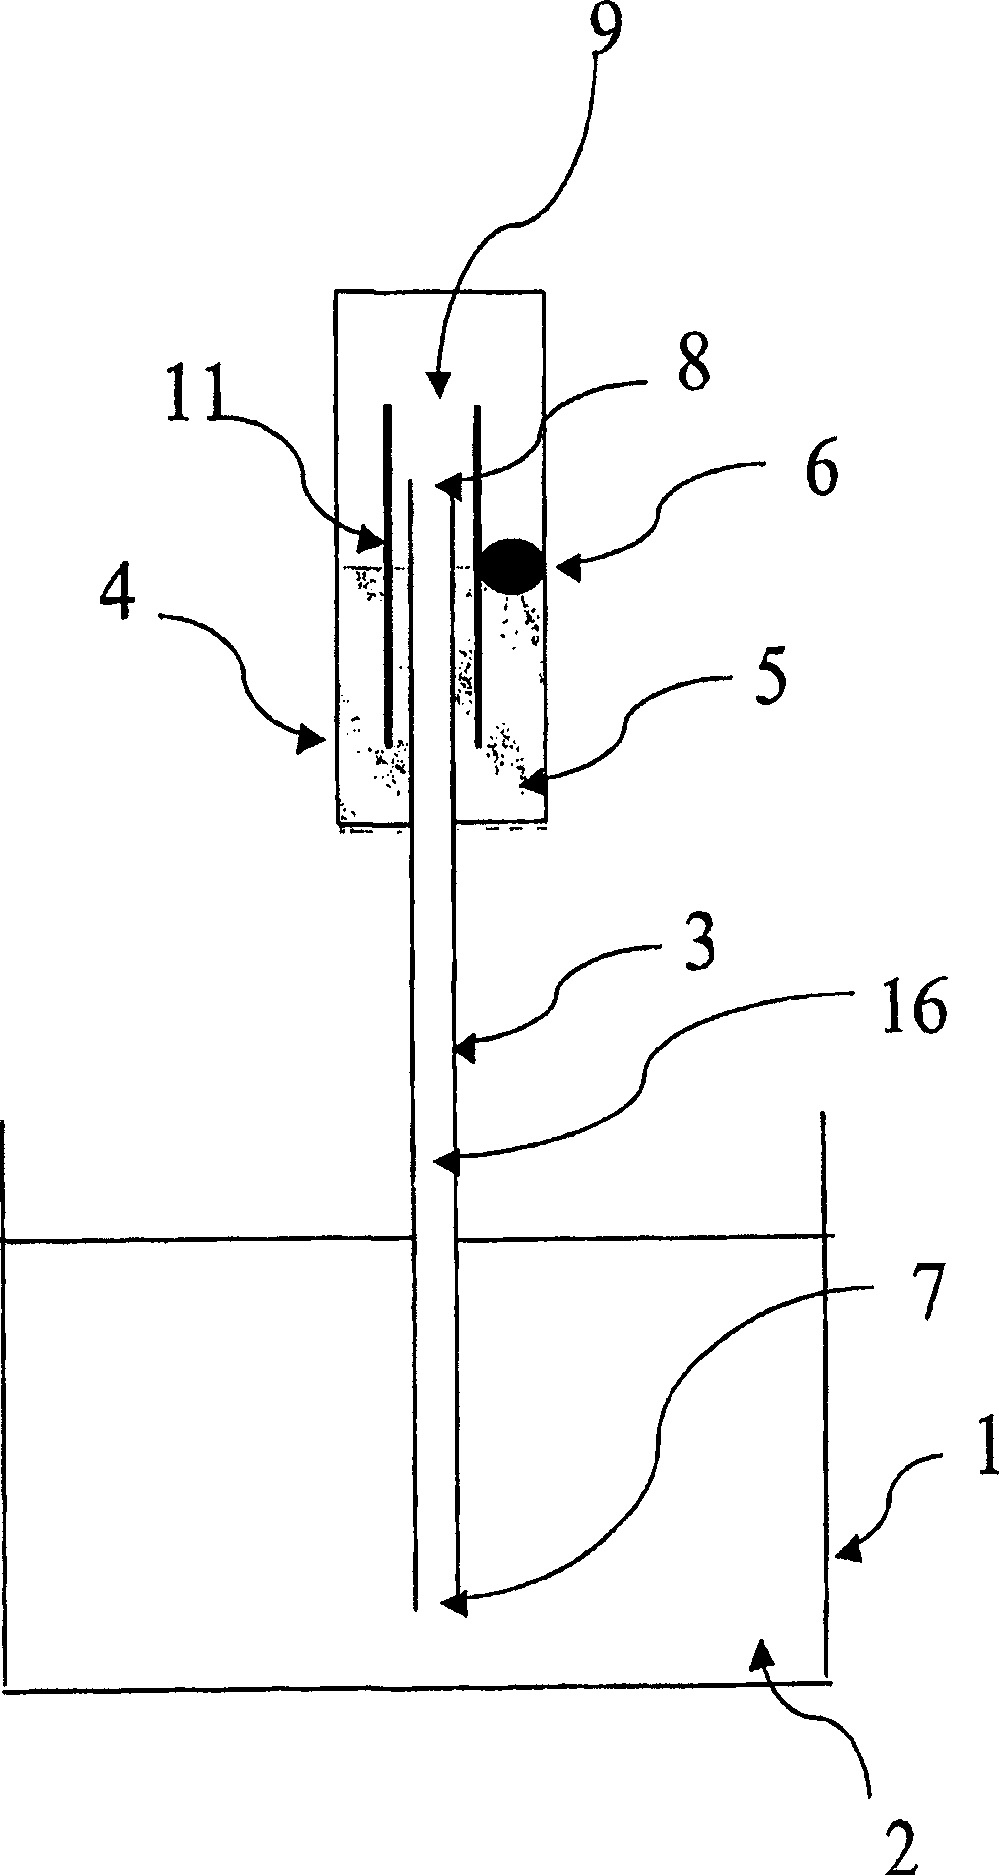 Method for the detection and/or identification of bacteria present in a sample